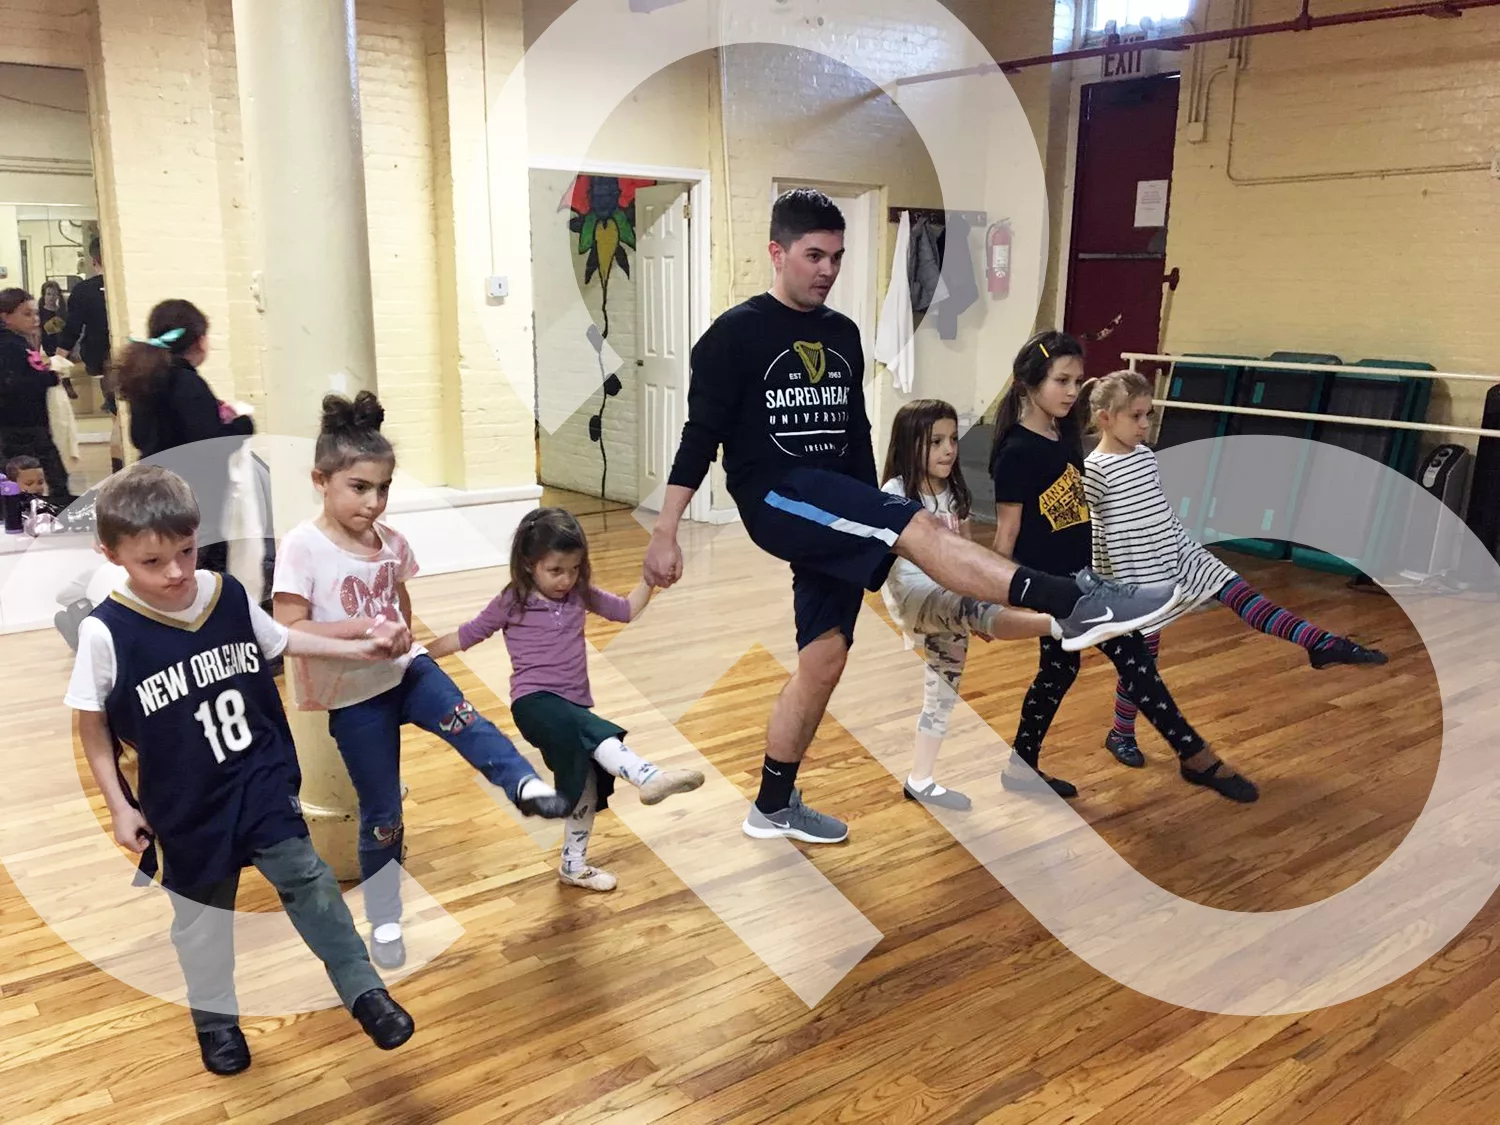 A group of young kids learning basic steps with their dance teacher in a studio with a wooden floor. The IDTANA logo is woven throughout.